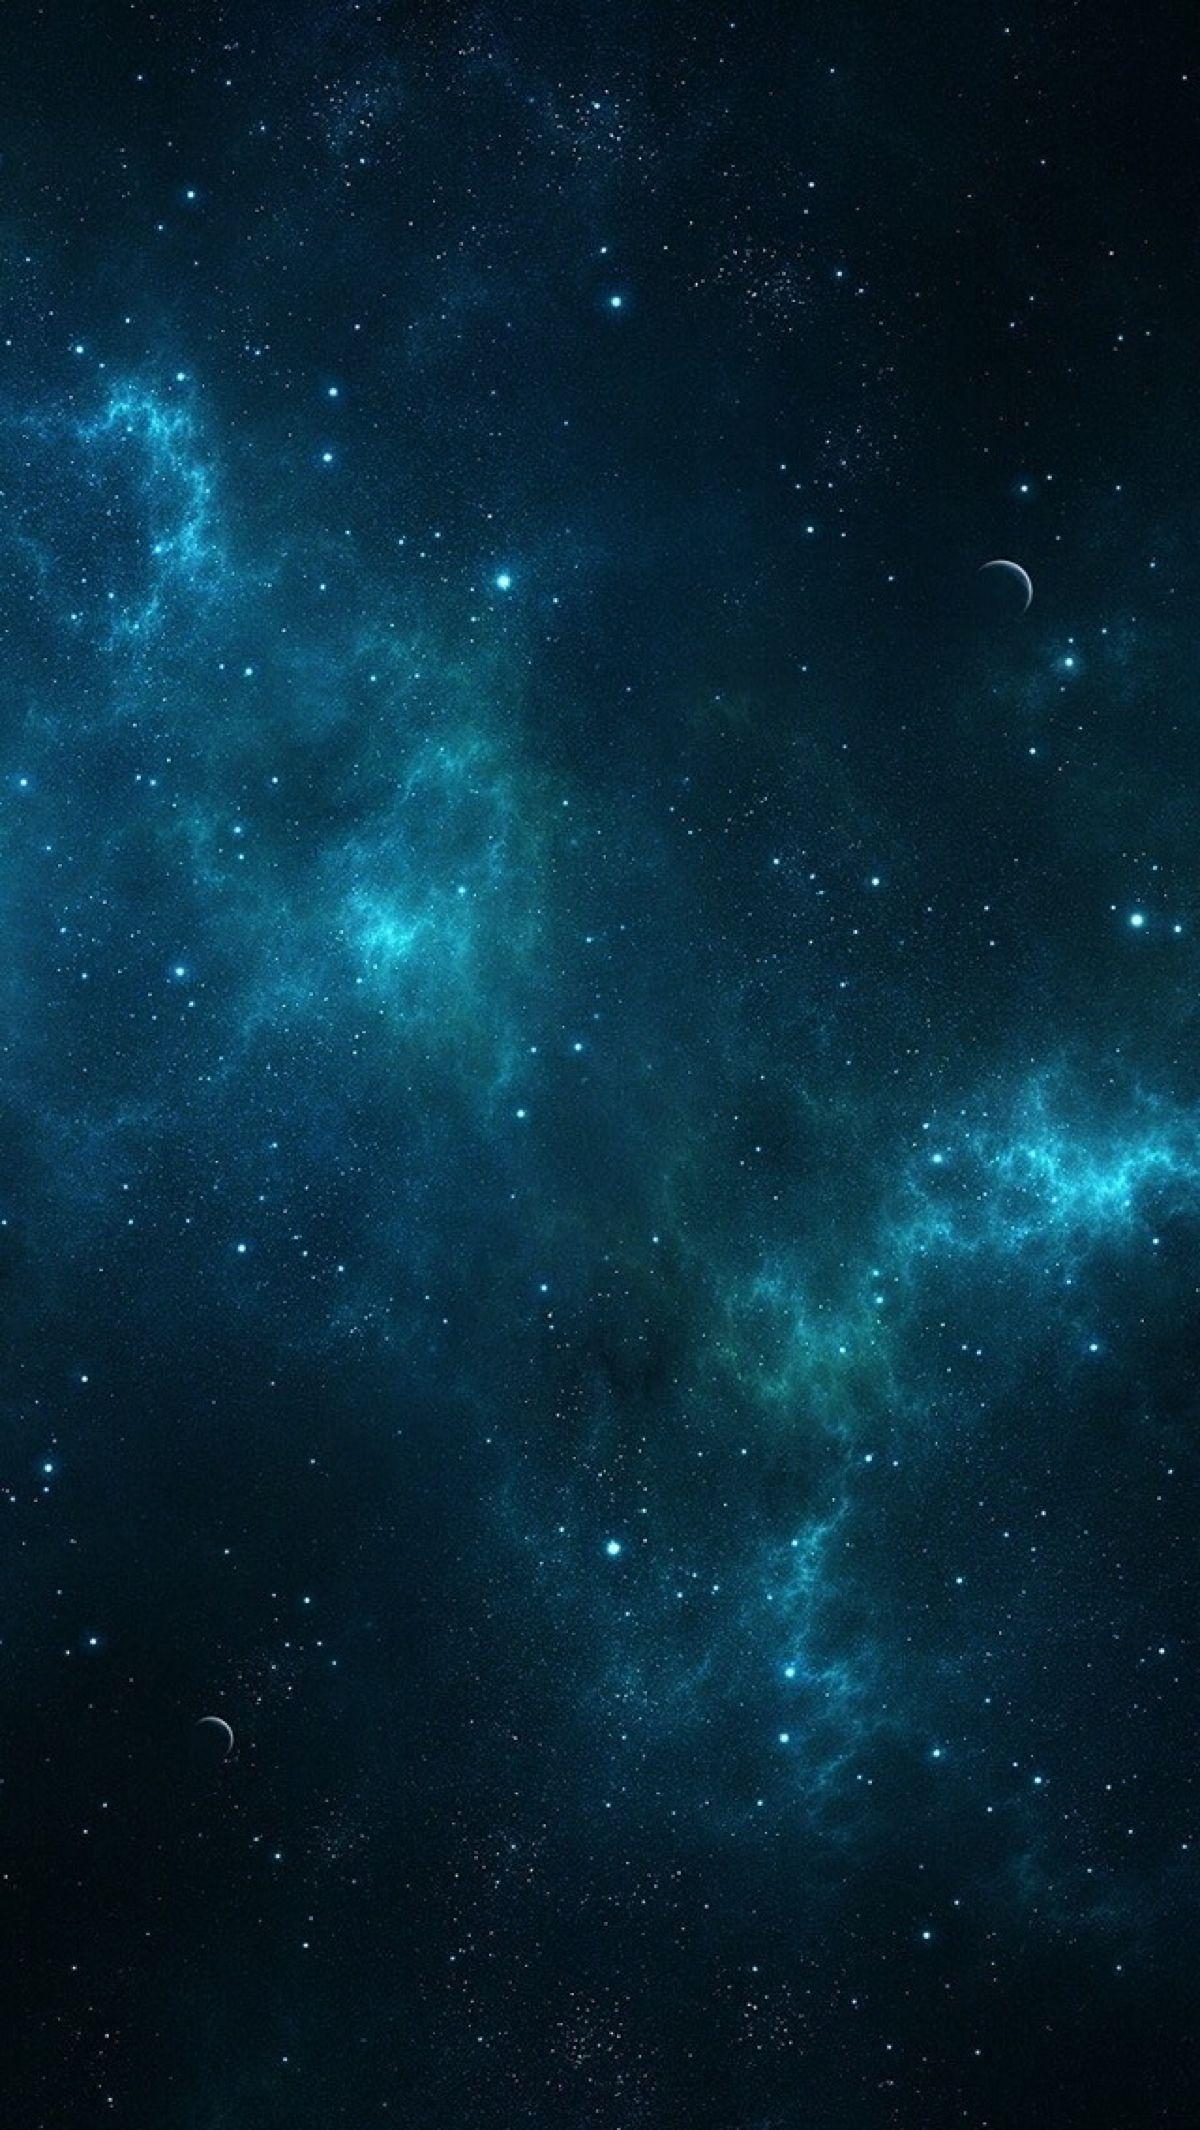 Space wallpapers iphone 876s6 for parallax desktop backgrounds hd  pictures and images